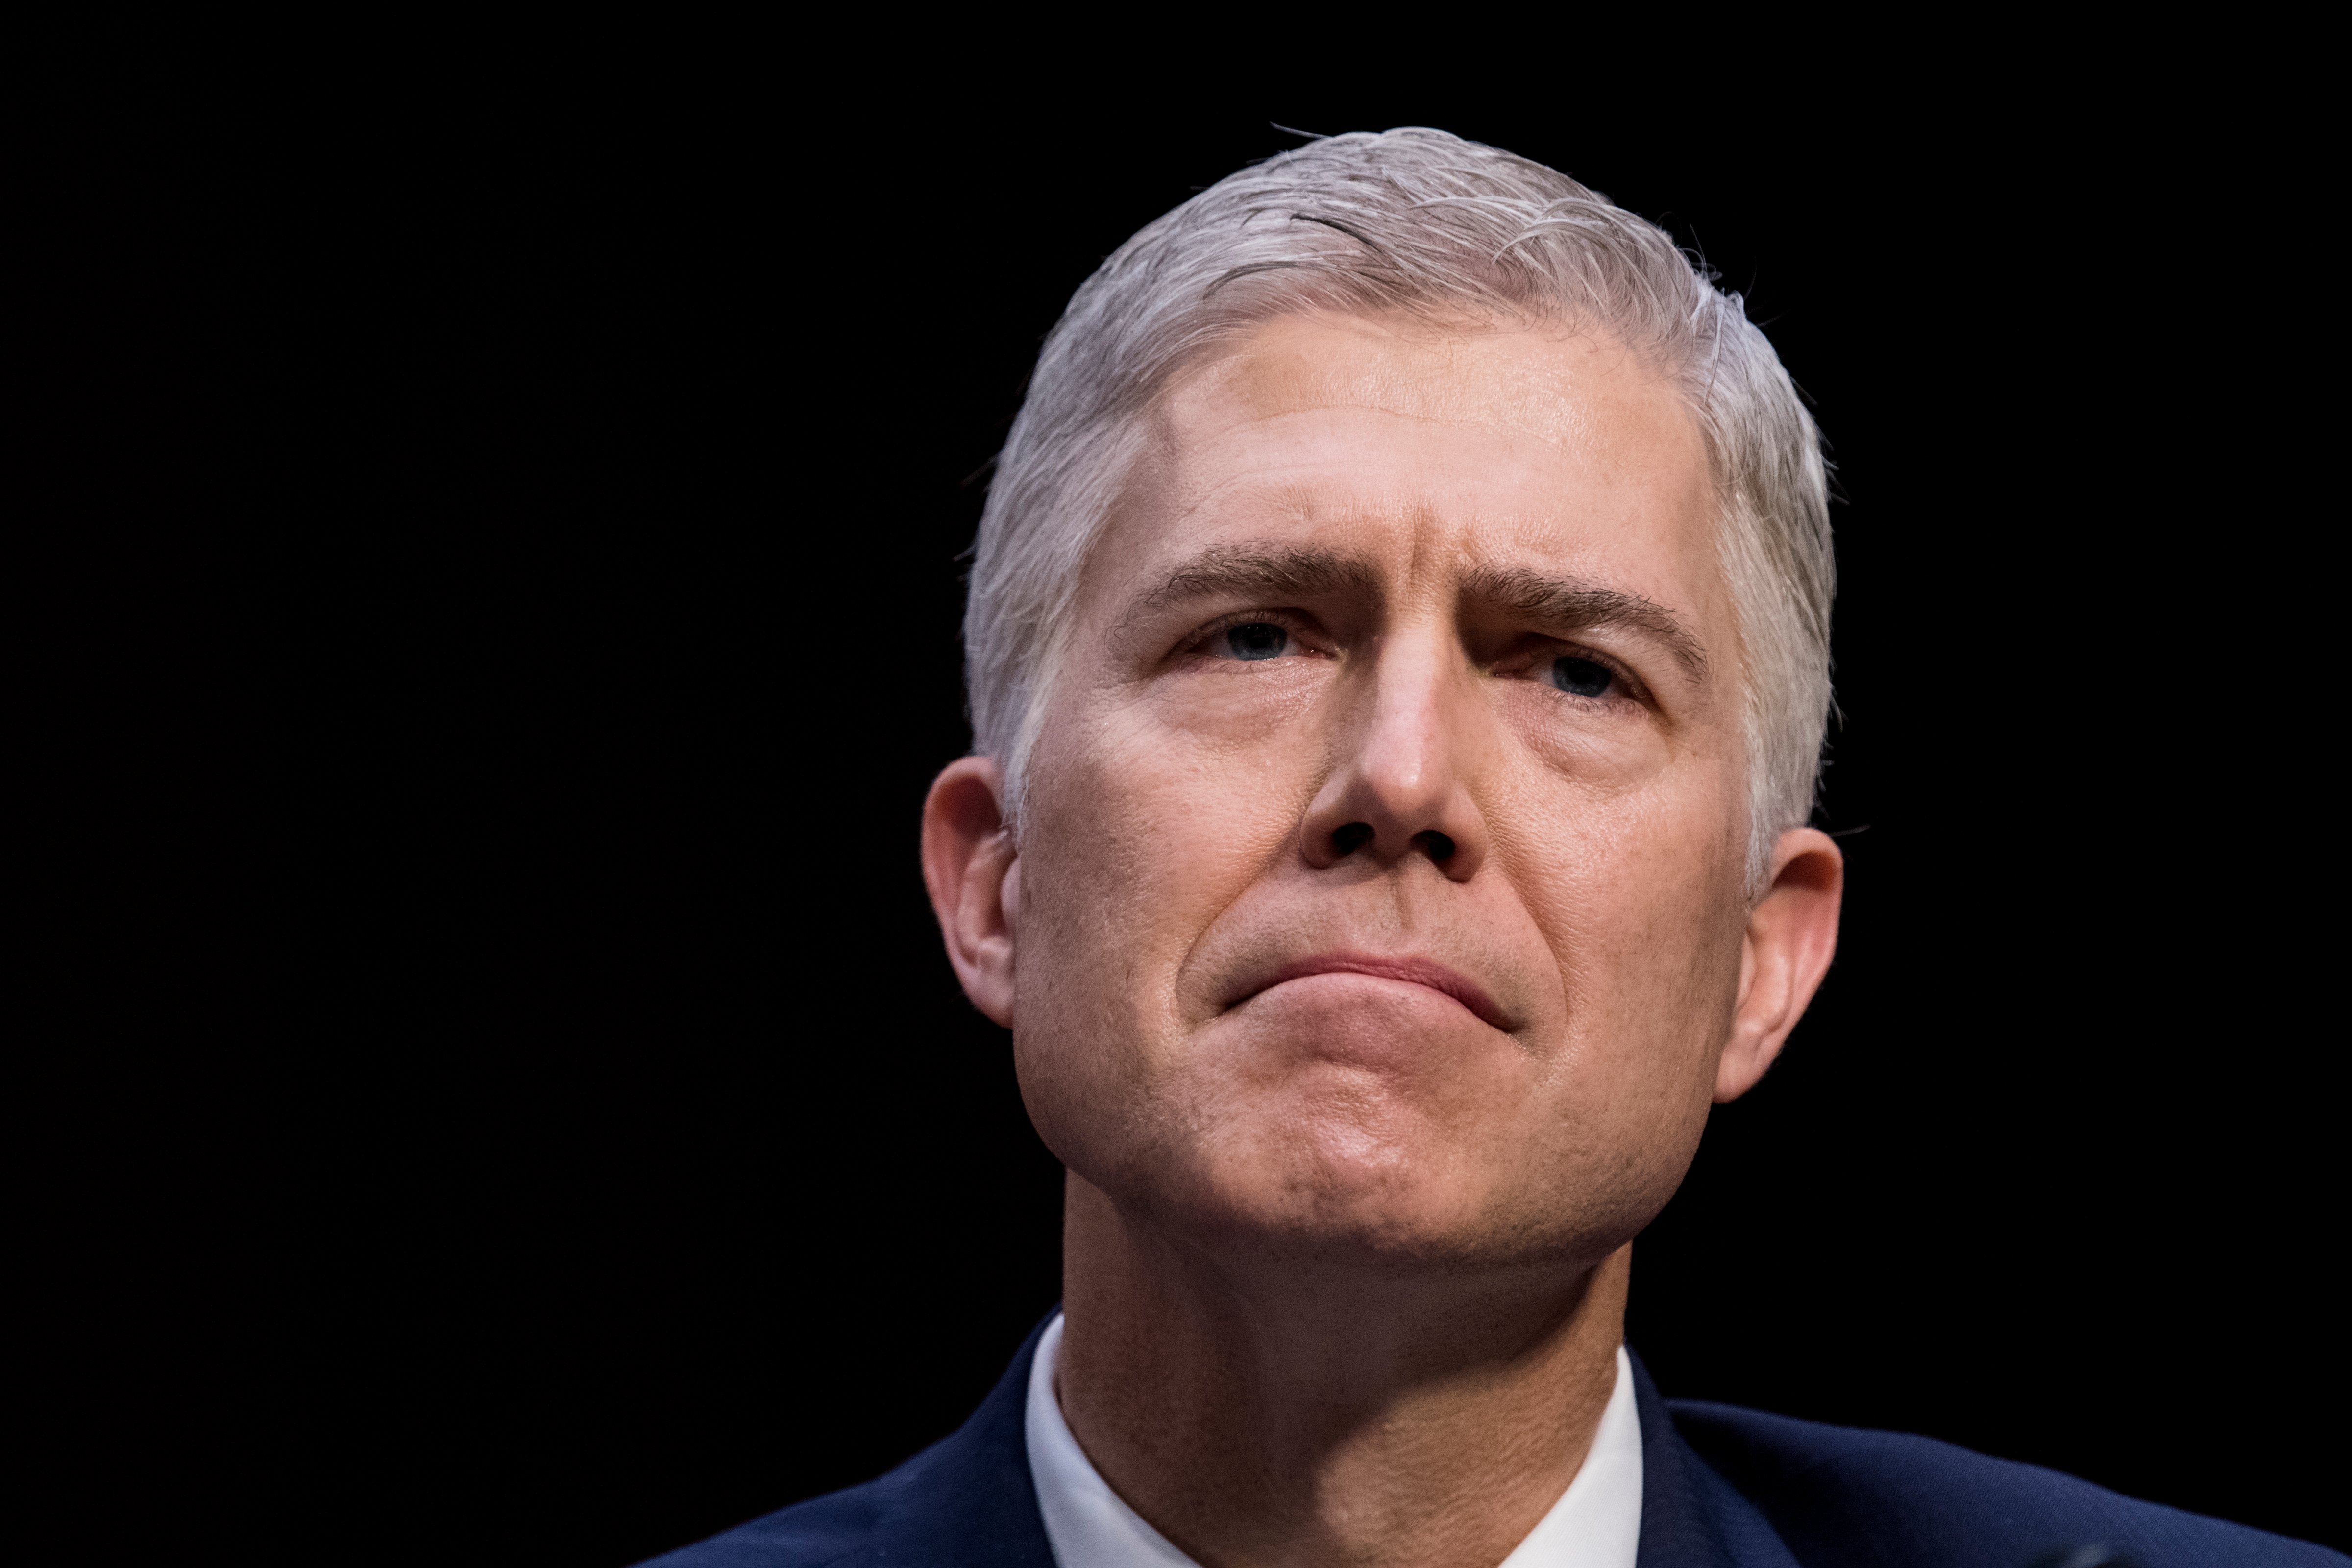 Neil Gorsuch, nominee to be Associate Justice of the U.S. Supreme Court, listens to Senators' opening statements during the first day of the Senate Judiciary Committee confirmation hearings on Monday, March 20, 2017. (Bill Clark&mdash;CQ-Roll Call,Inc./Getty Images)